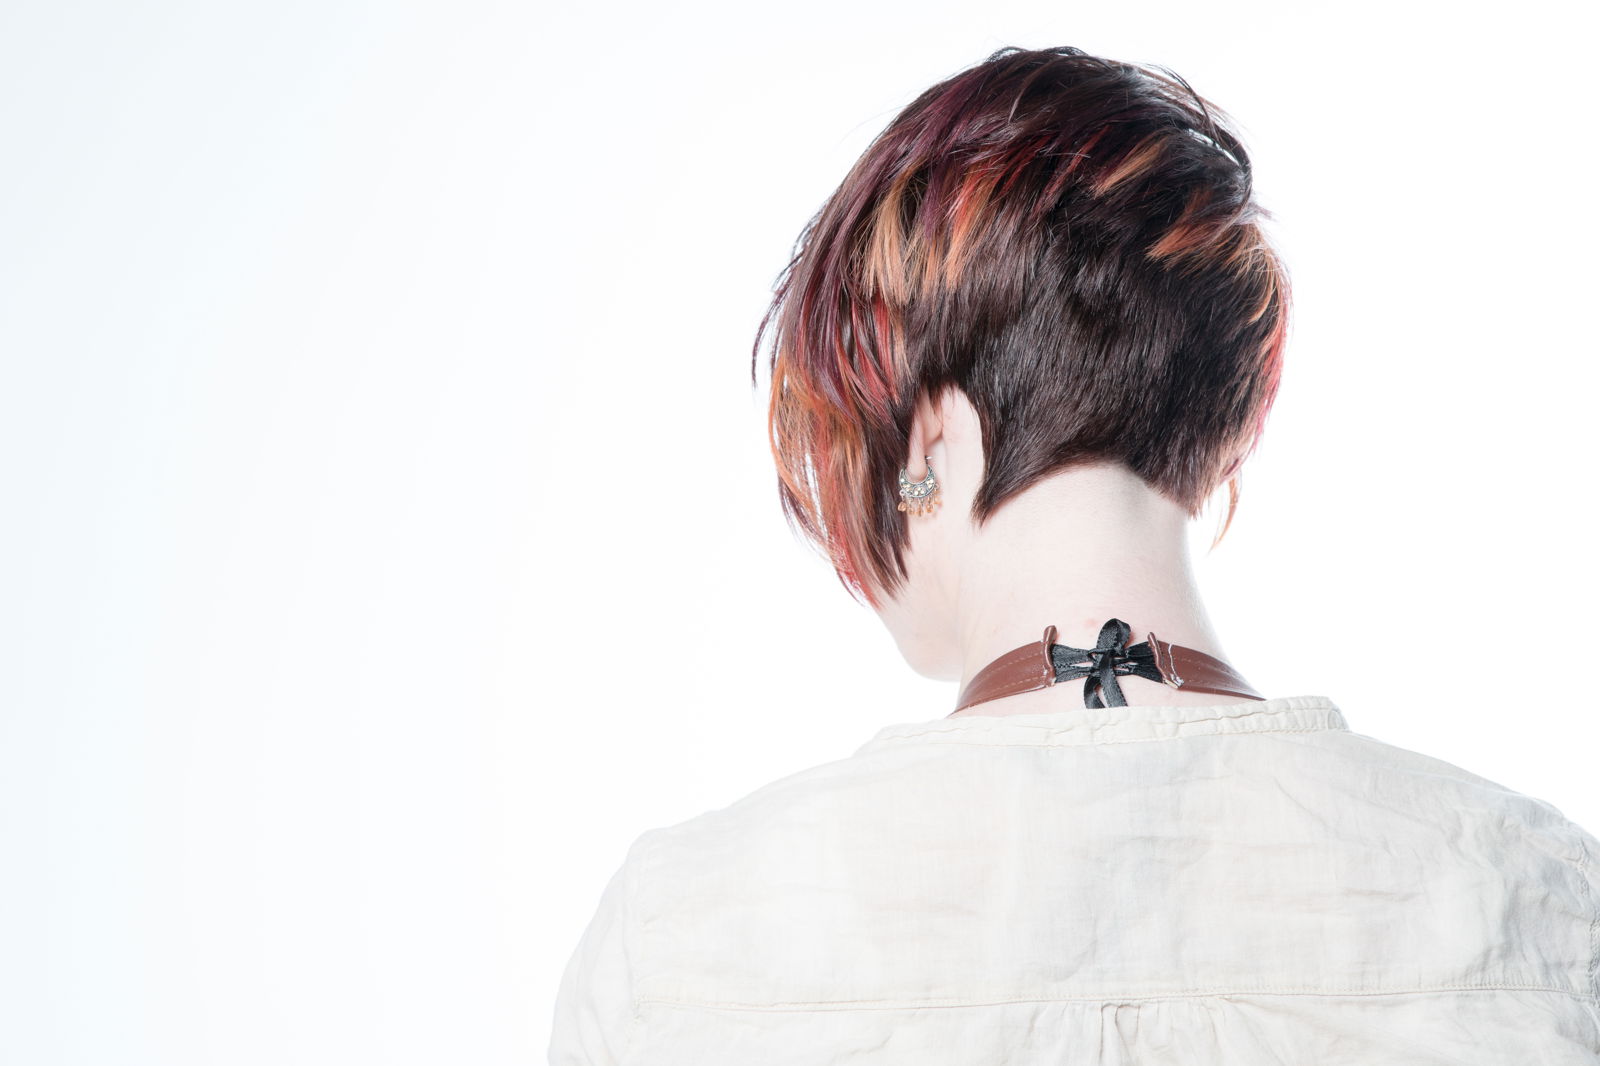 Model with a pixie cut that has orange highlights at the ends, view from the back